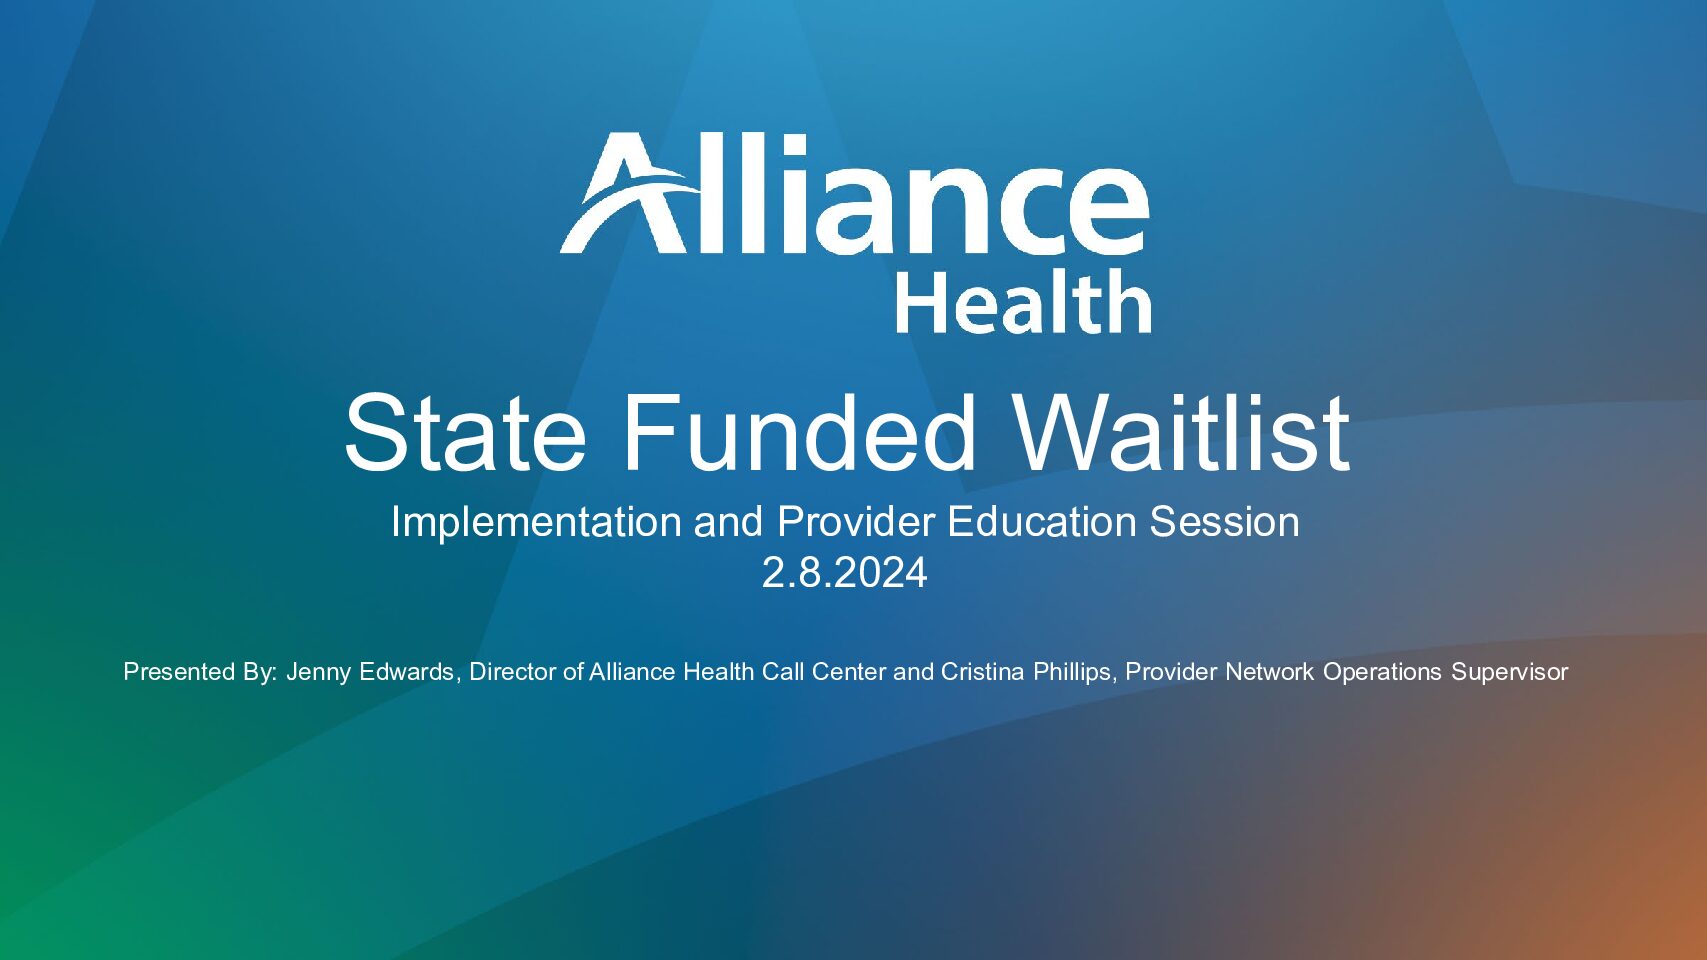 State Funded Waitlist Implementation and Provider Education